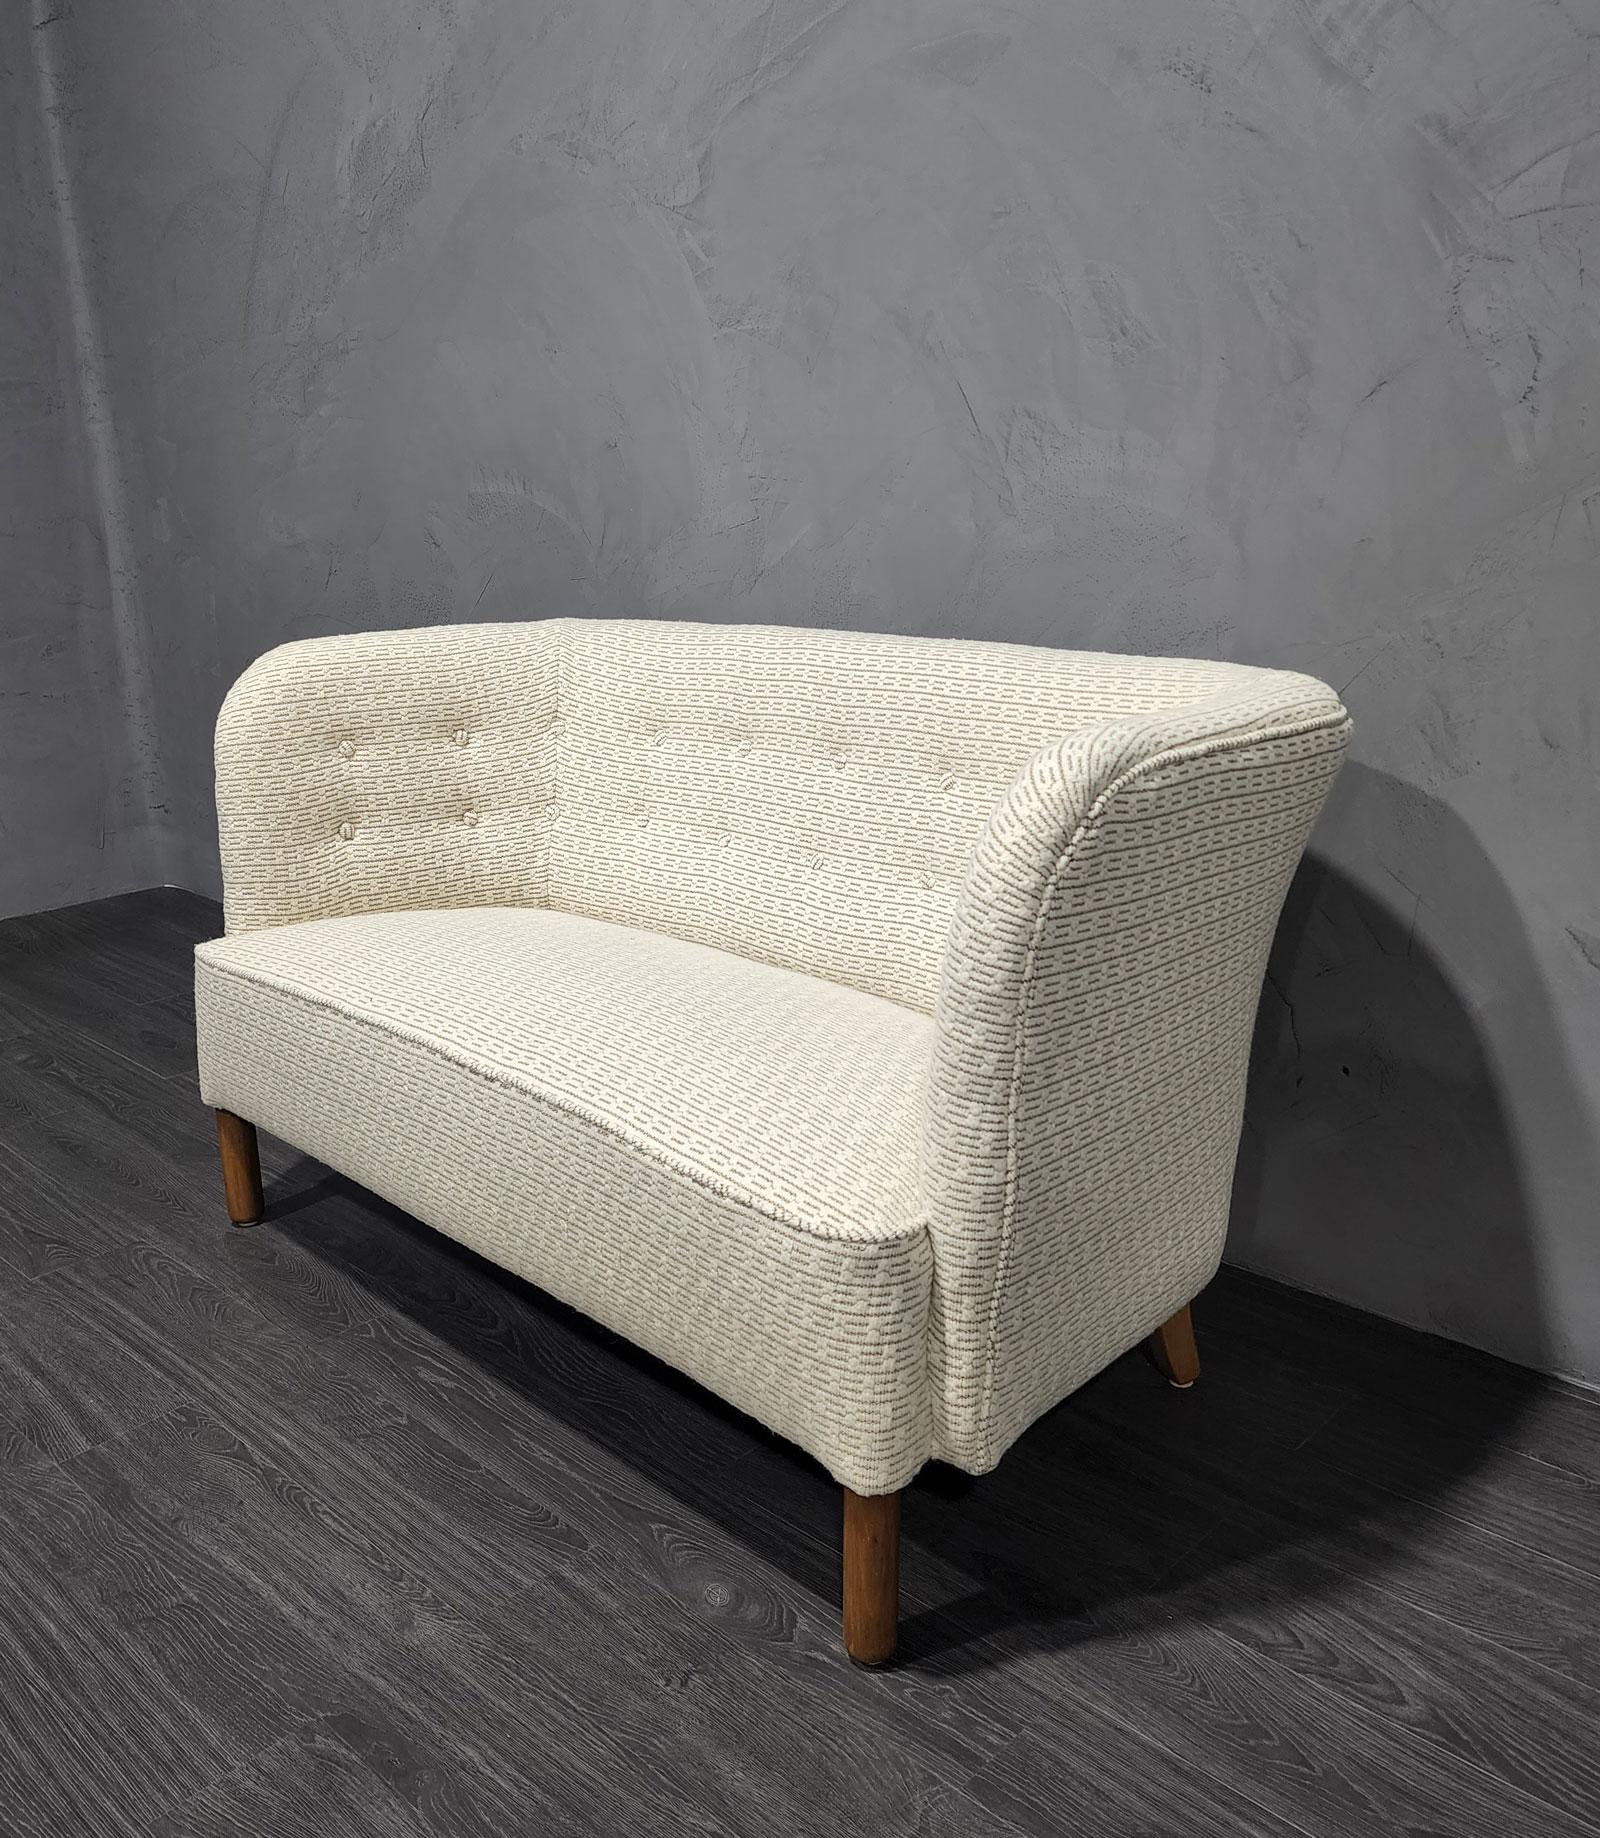 We have reupholstered this beautiful high quality settee designed by Agner Christoffersen in a rich textured Kelly Wearstler fabric.